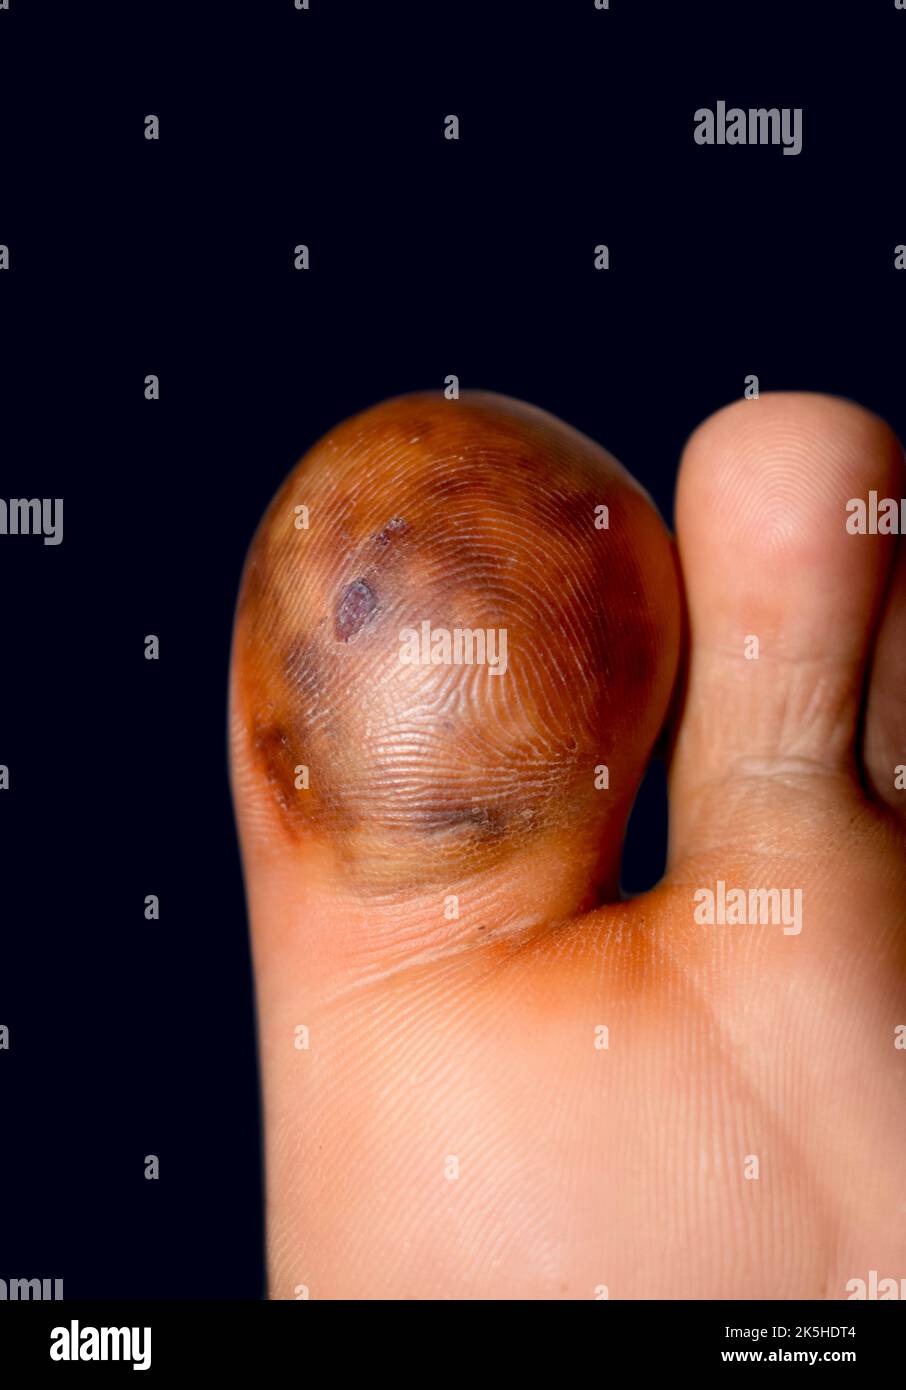 Abscess with surrounding cellulitis or Staphylococcal, Streptococcal skin infection at big toe of Asian Burmese male patient. Stock Photo